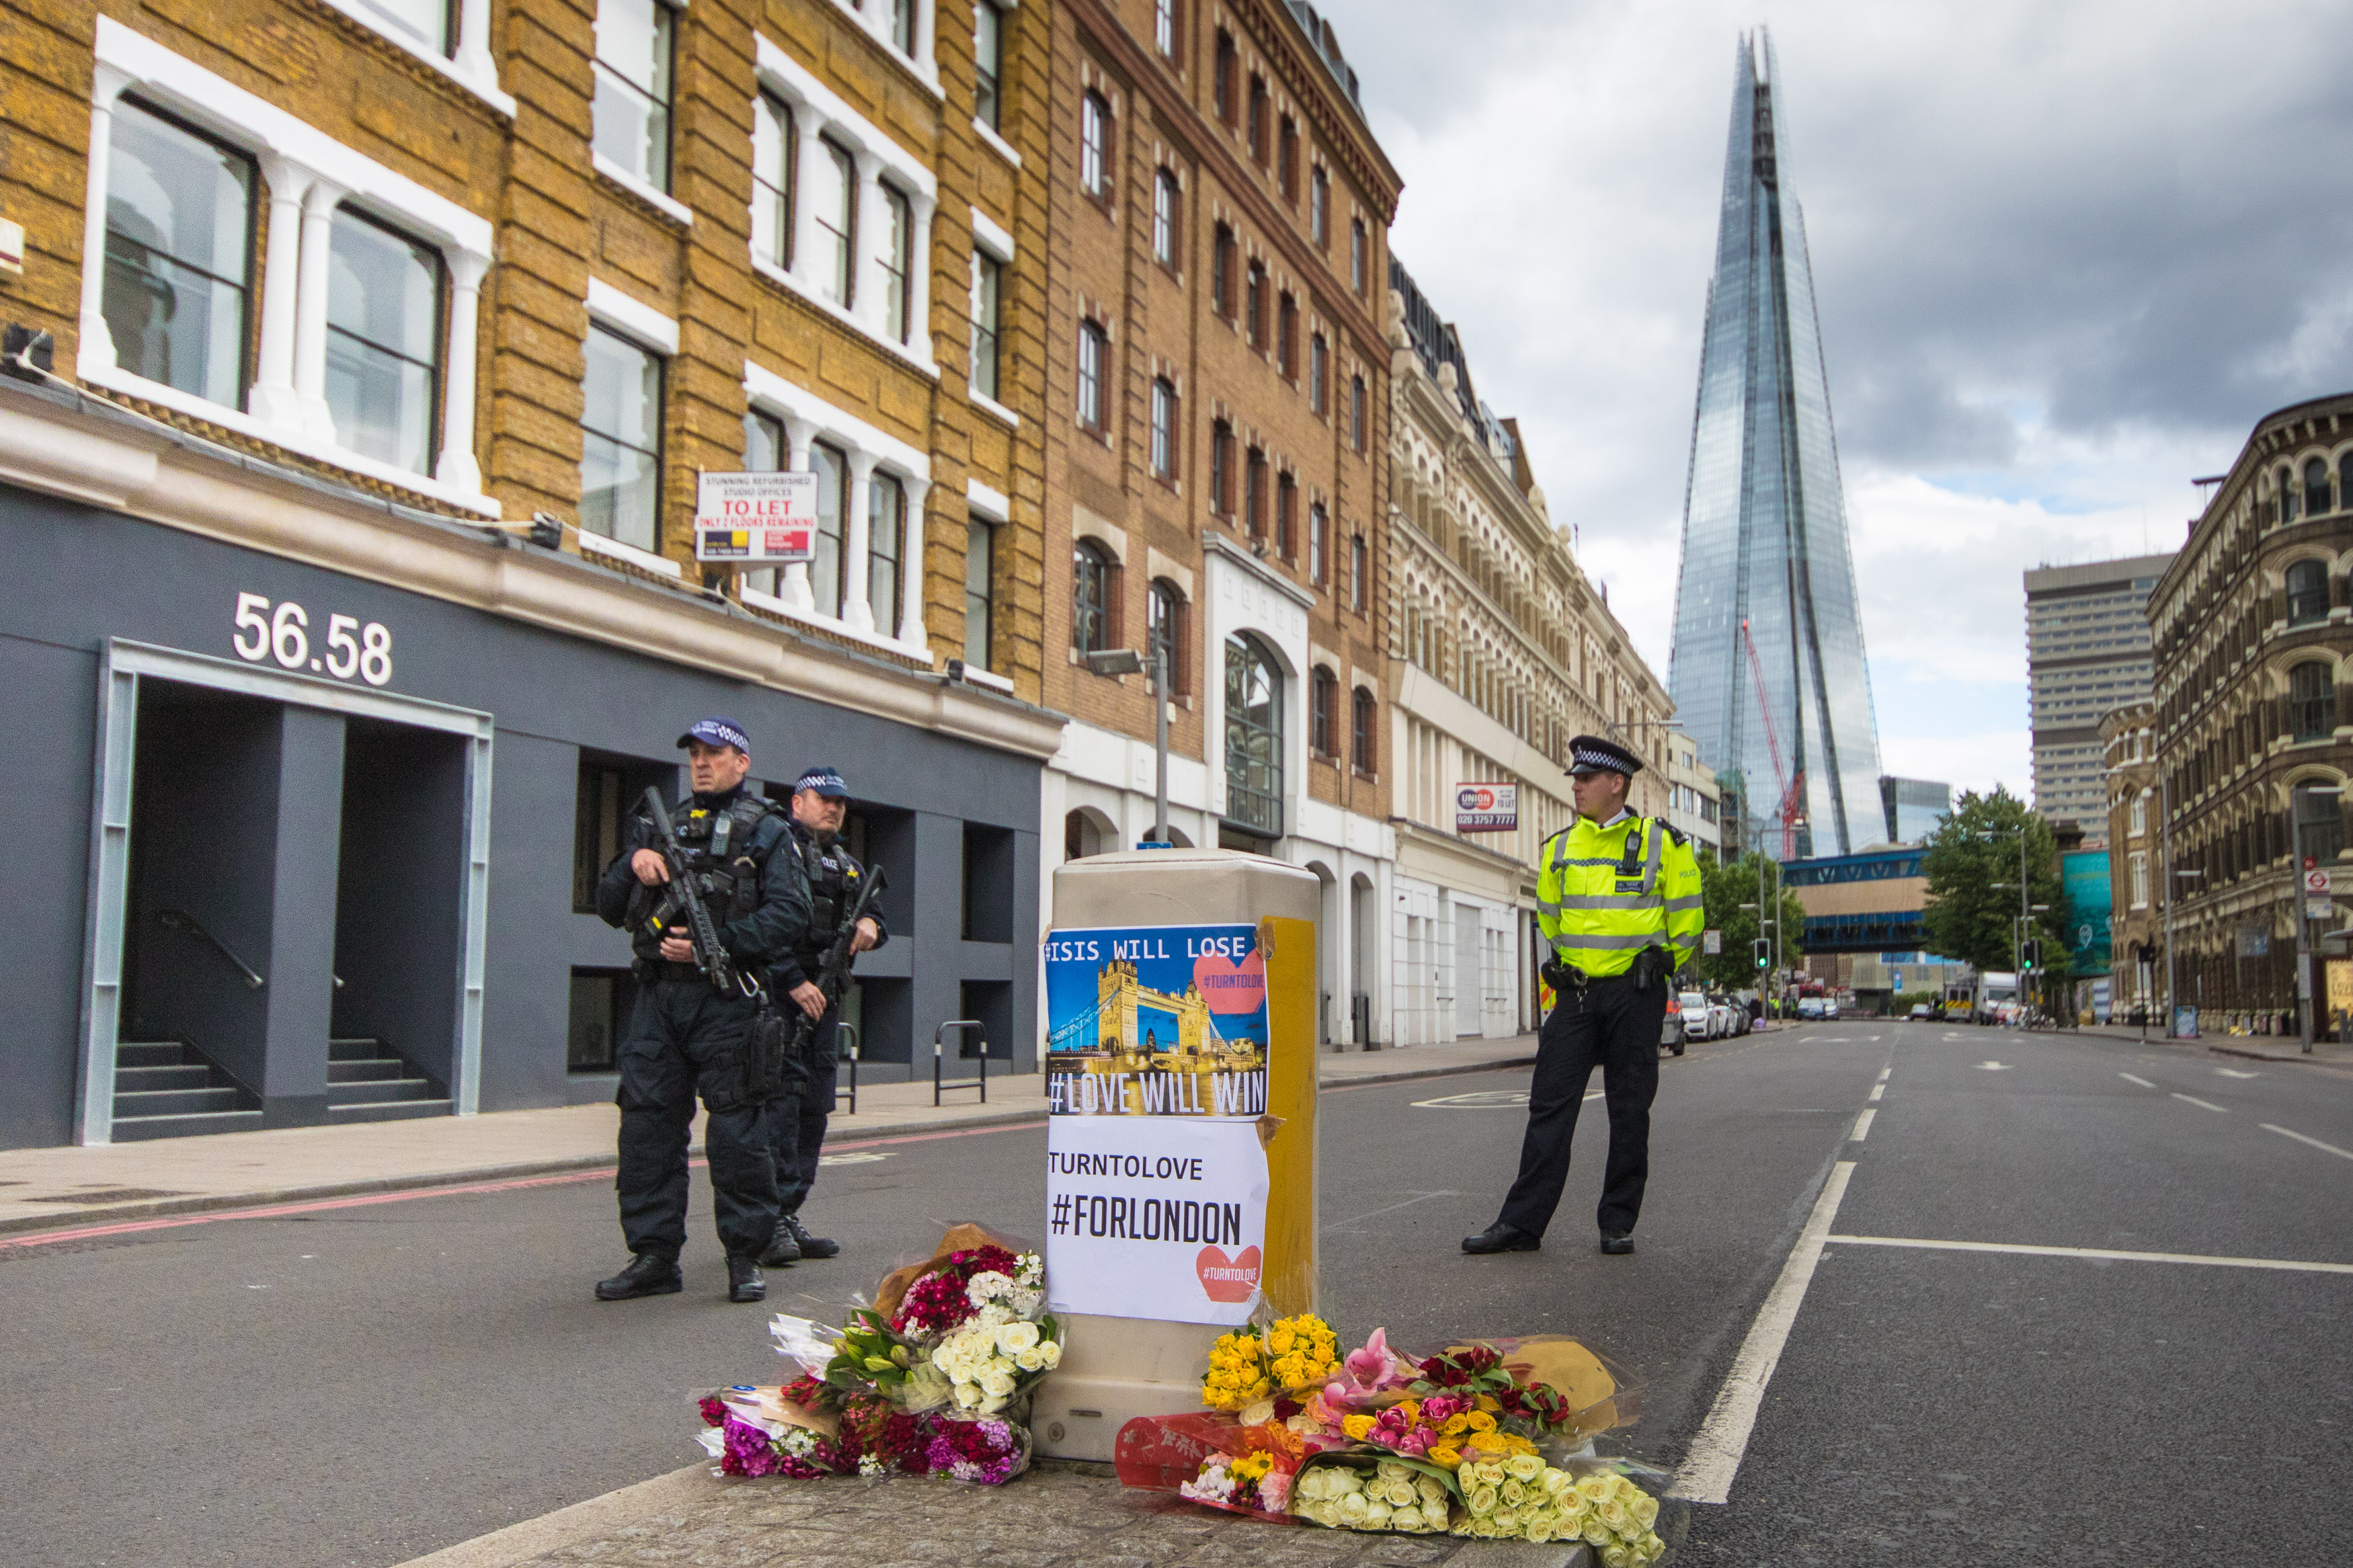 Armed police patrol the perimeter of the scene of the attack on London Bridge and Borough Market, June 4, 2017 in London. (Paul Davey—Barcroft Media/Getty Images)